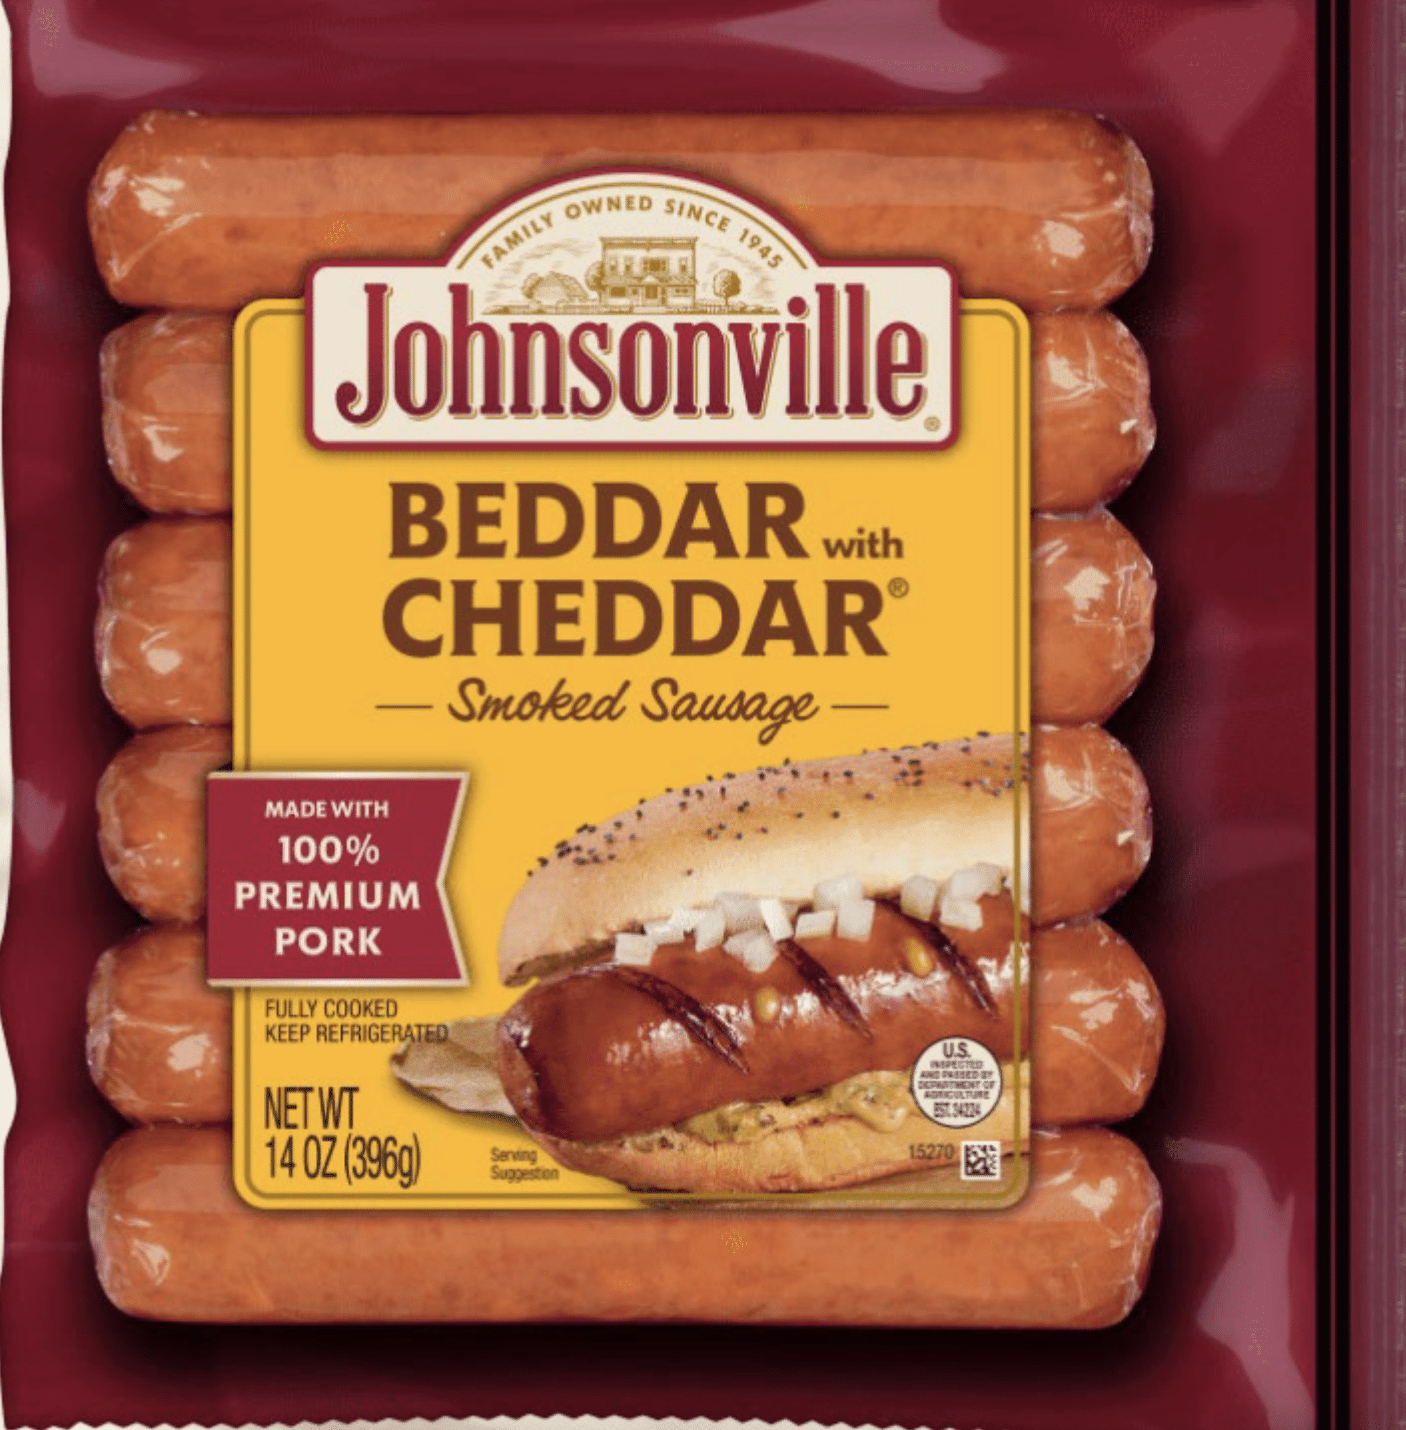 Johnsonville Recalls 42,000 Pounds of Cheddar Sausages